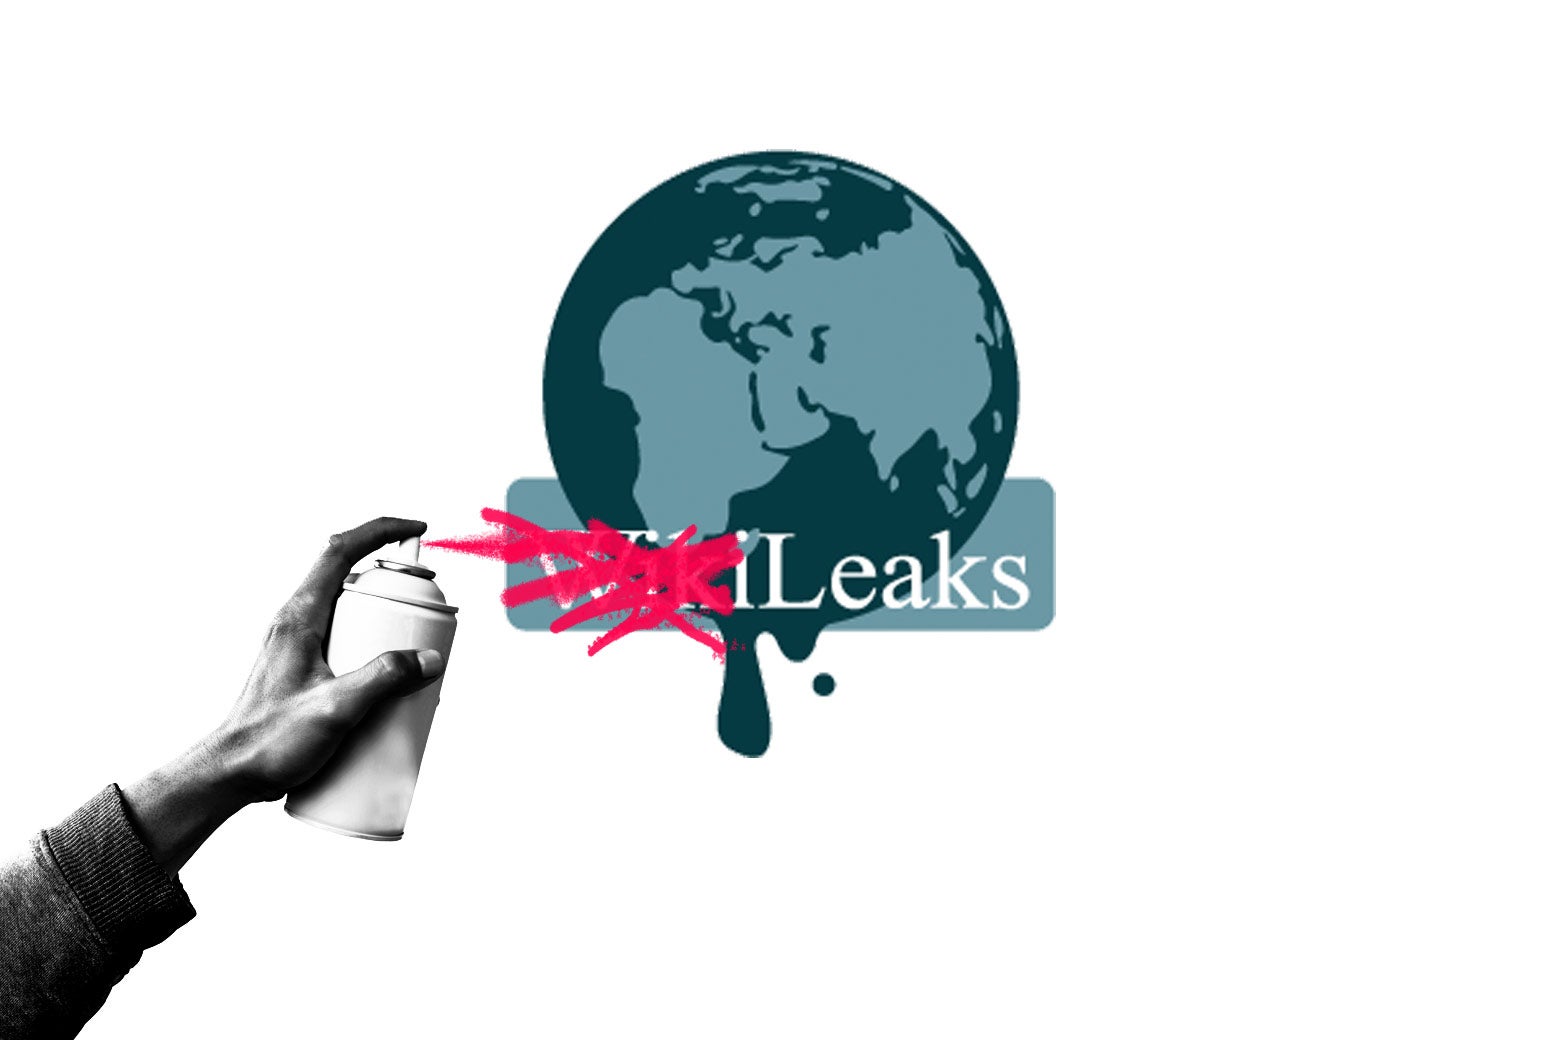 The WikiLeaks logo, with the "Wiki" part being spray-painted out.